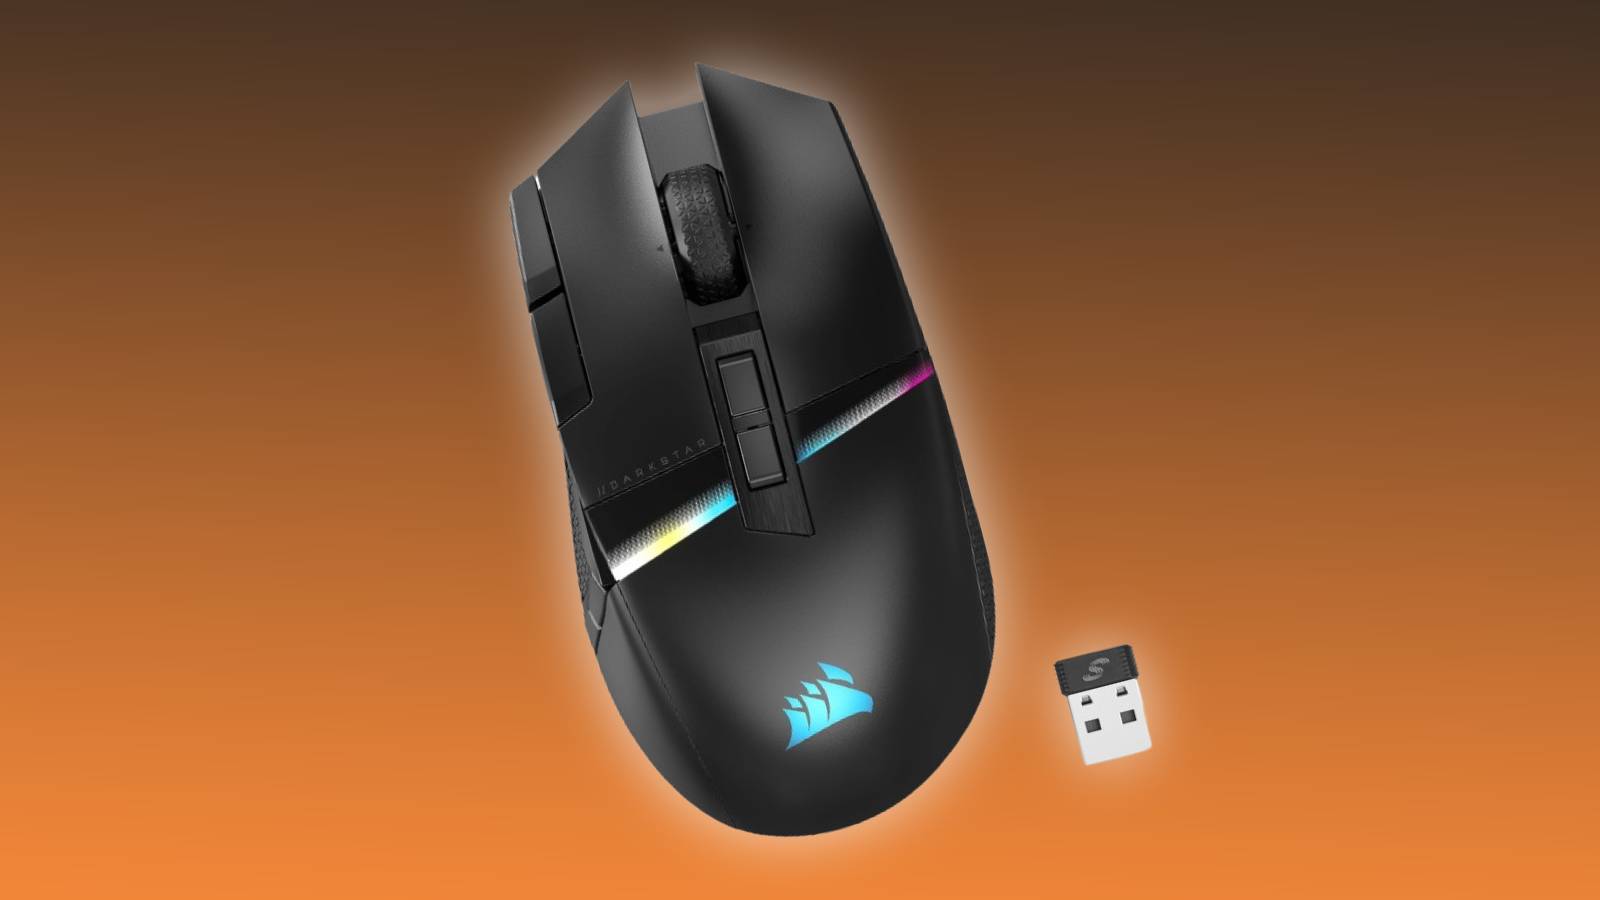 Image of the Corsair DARKSTAR MMO mouse on an orange and black background.